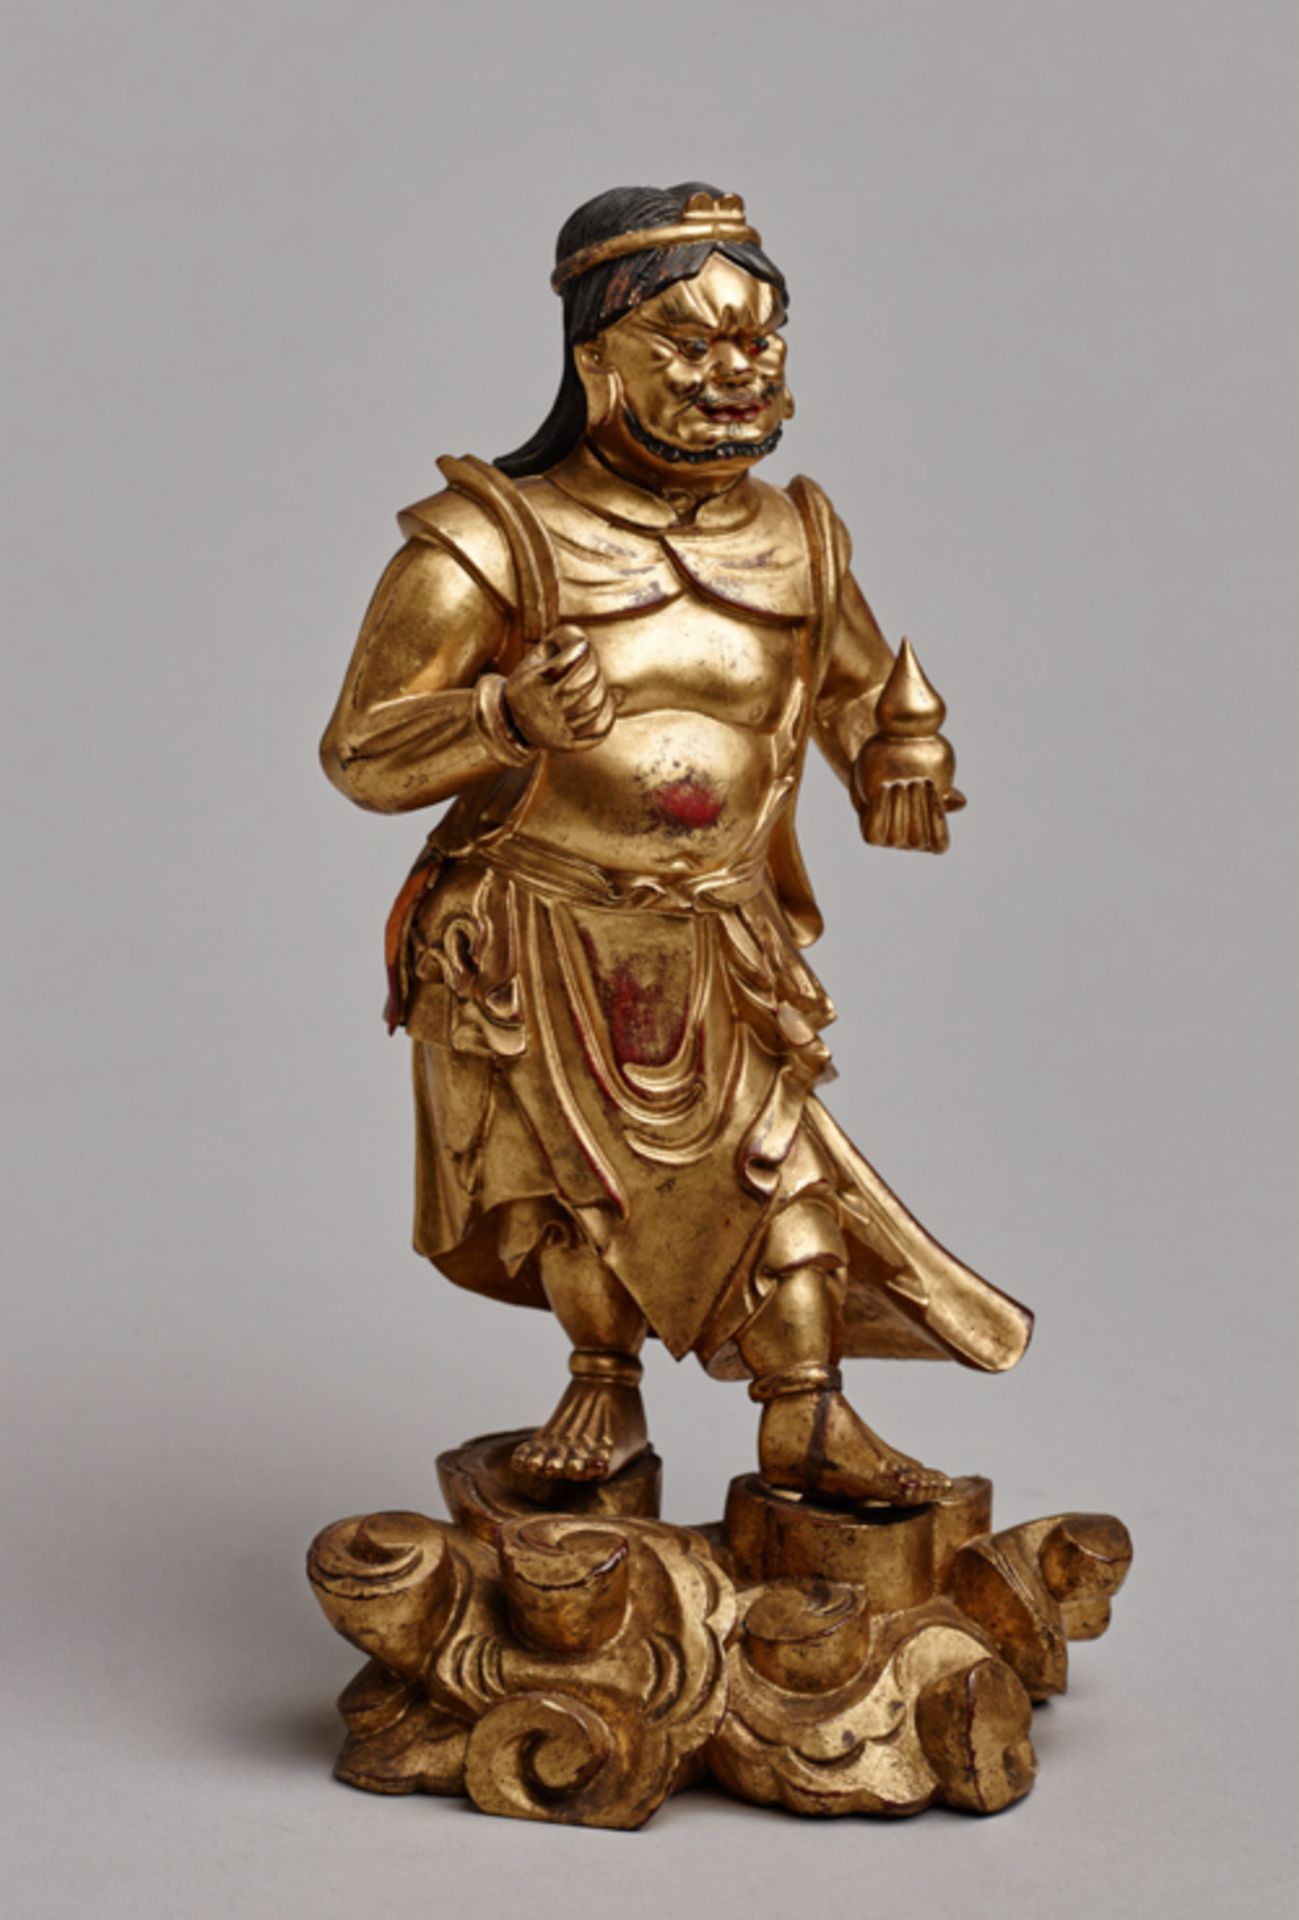 IMMORTAL OR PROTECTOR DEITY  Wood with gilding. Korea or Japan, 19th cent.  An almost entirely